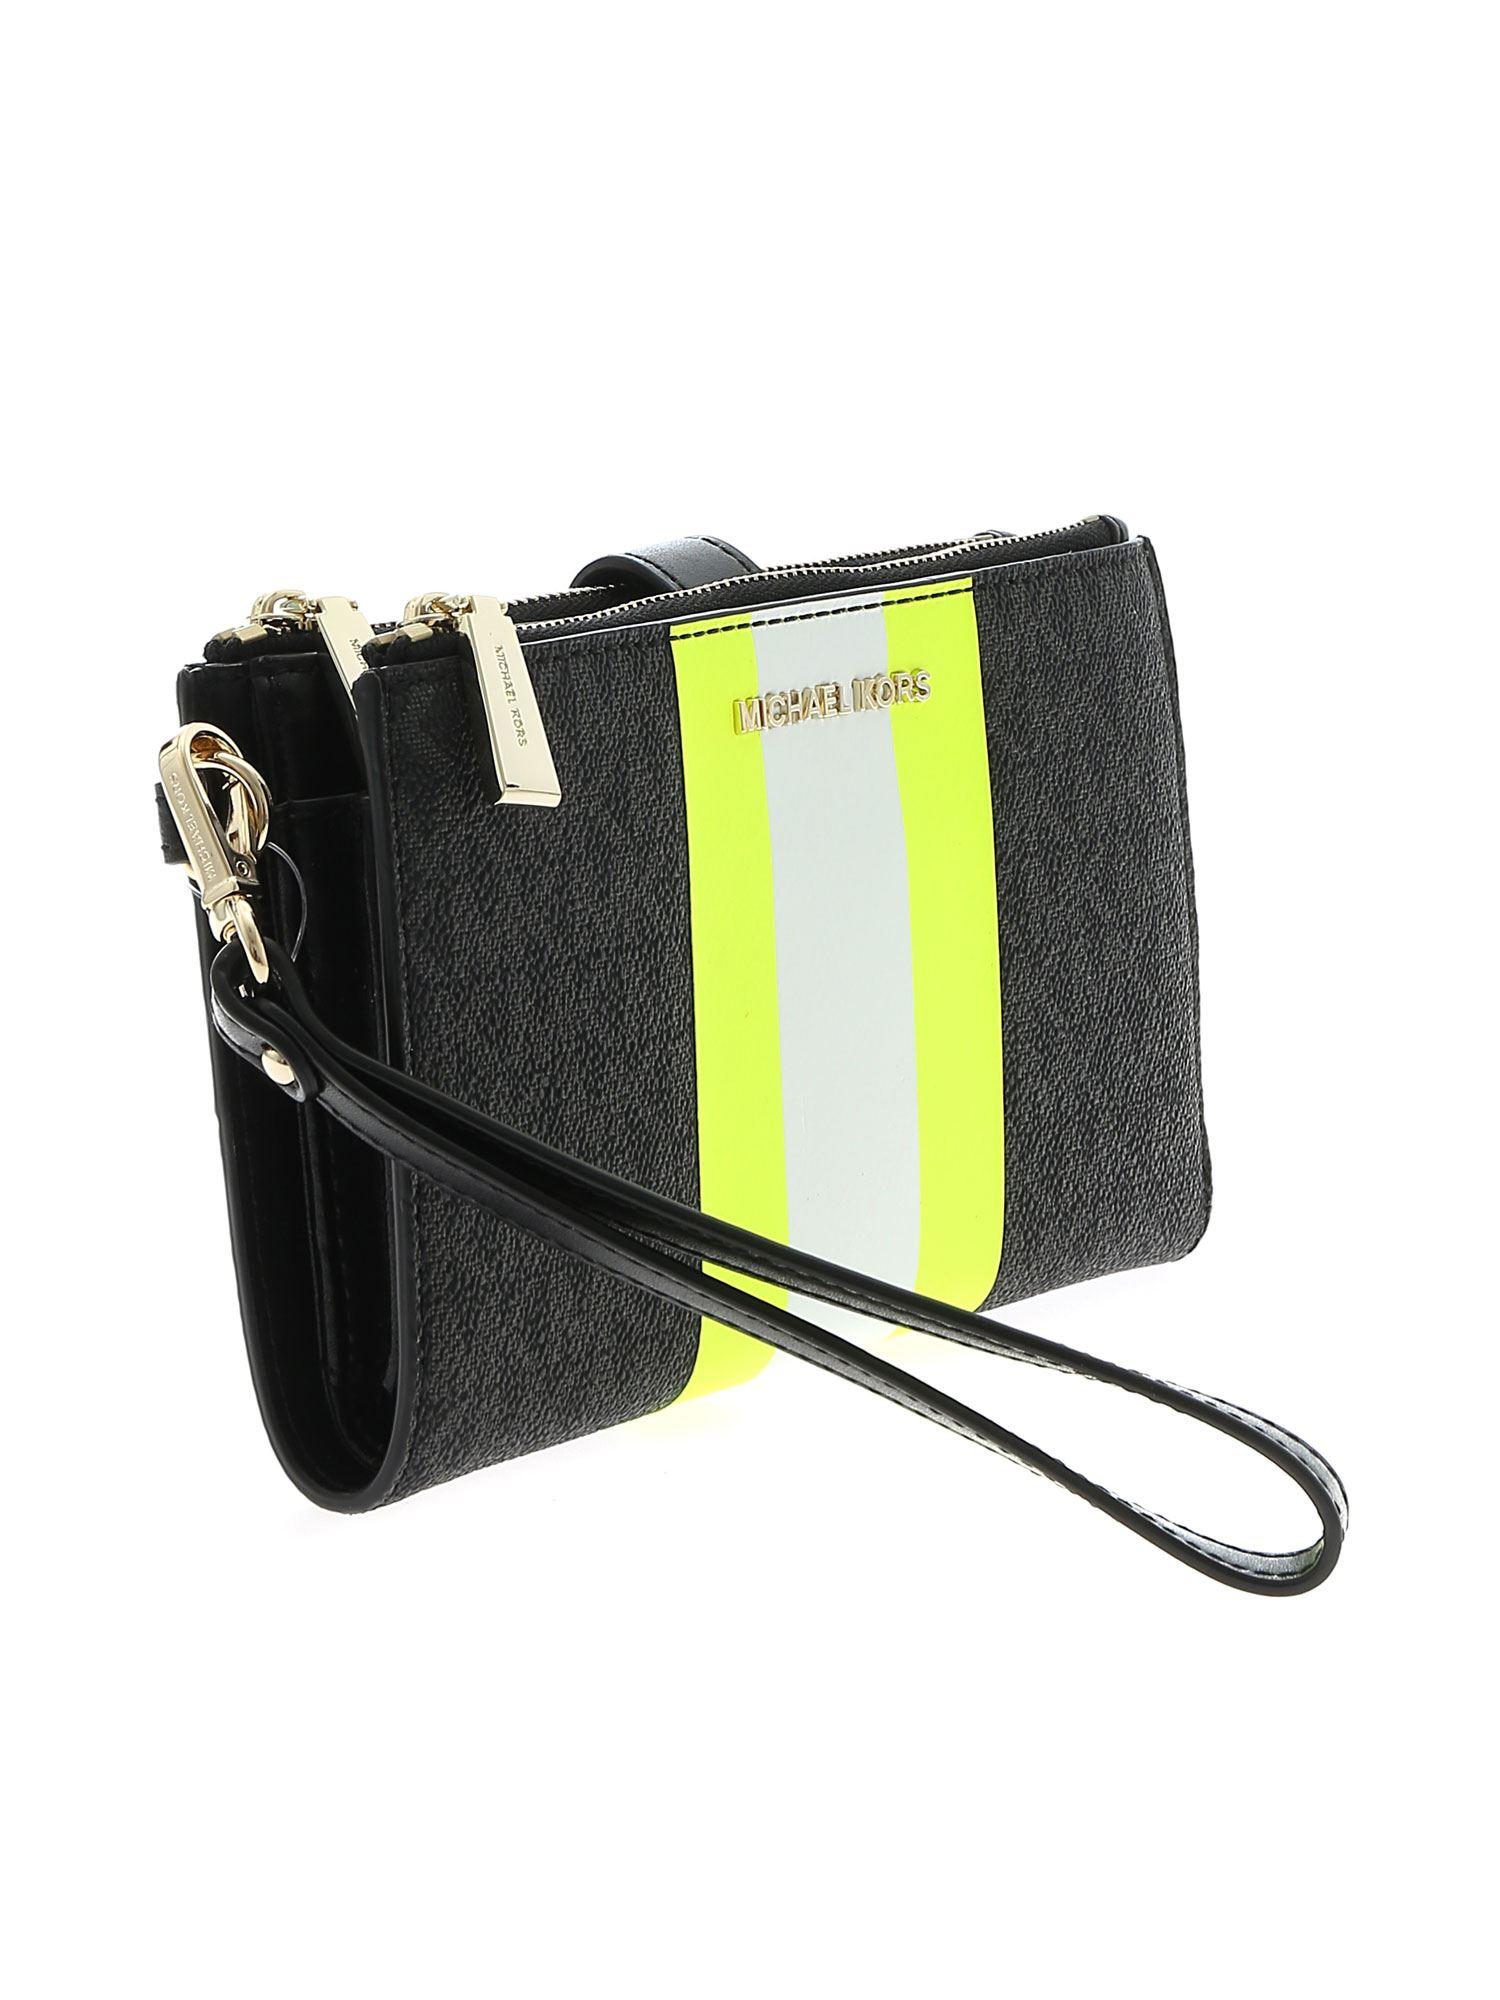 Michael Kors Wristlets Wallet In Black With Neon Yellow Detail - Lyst